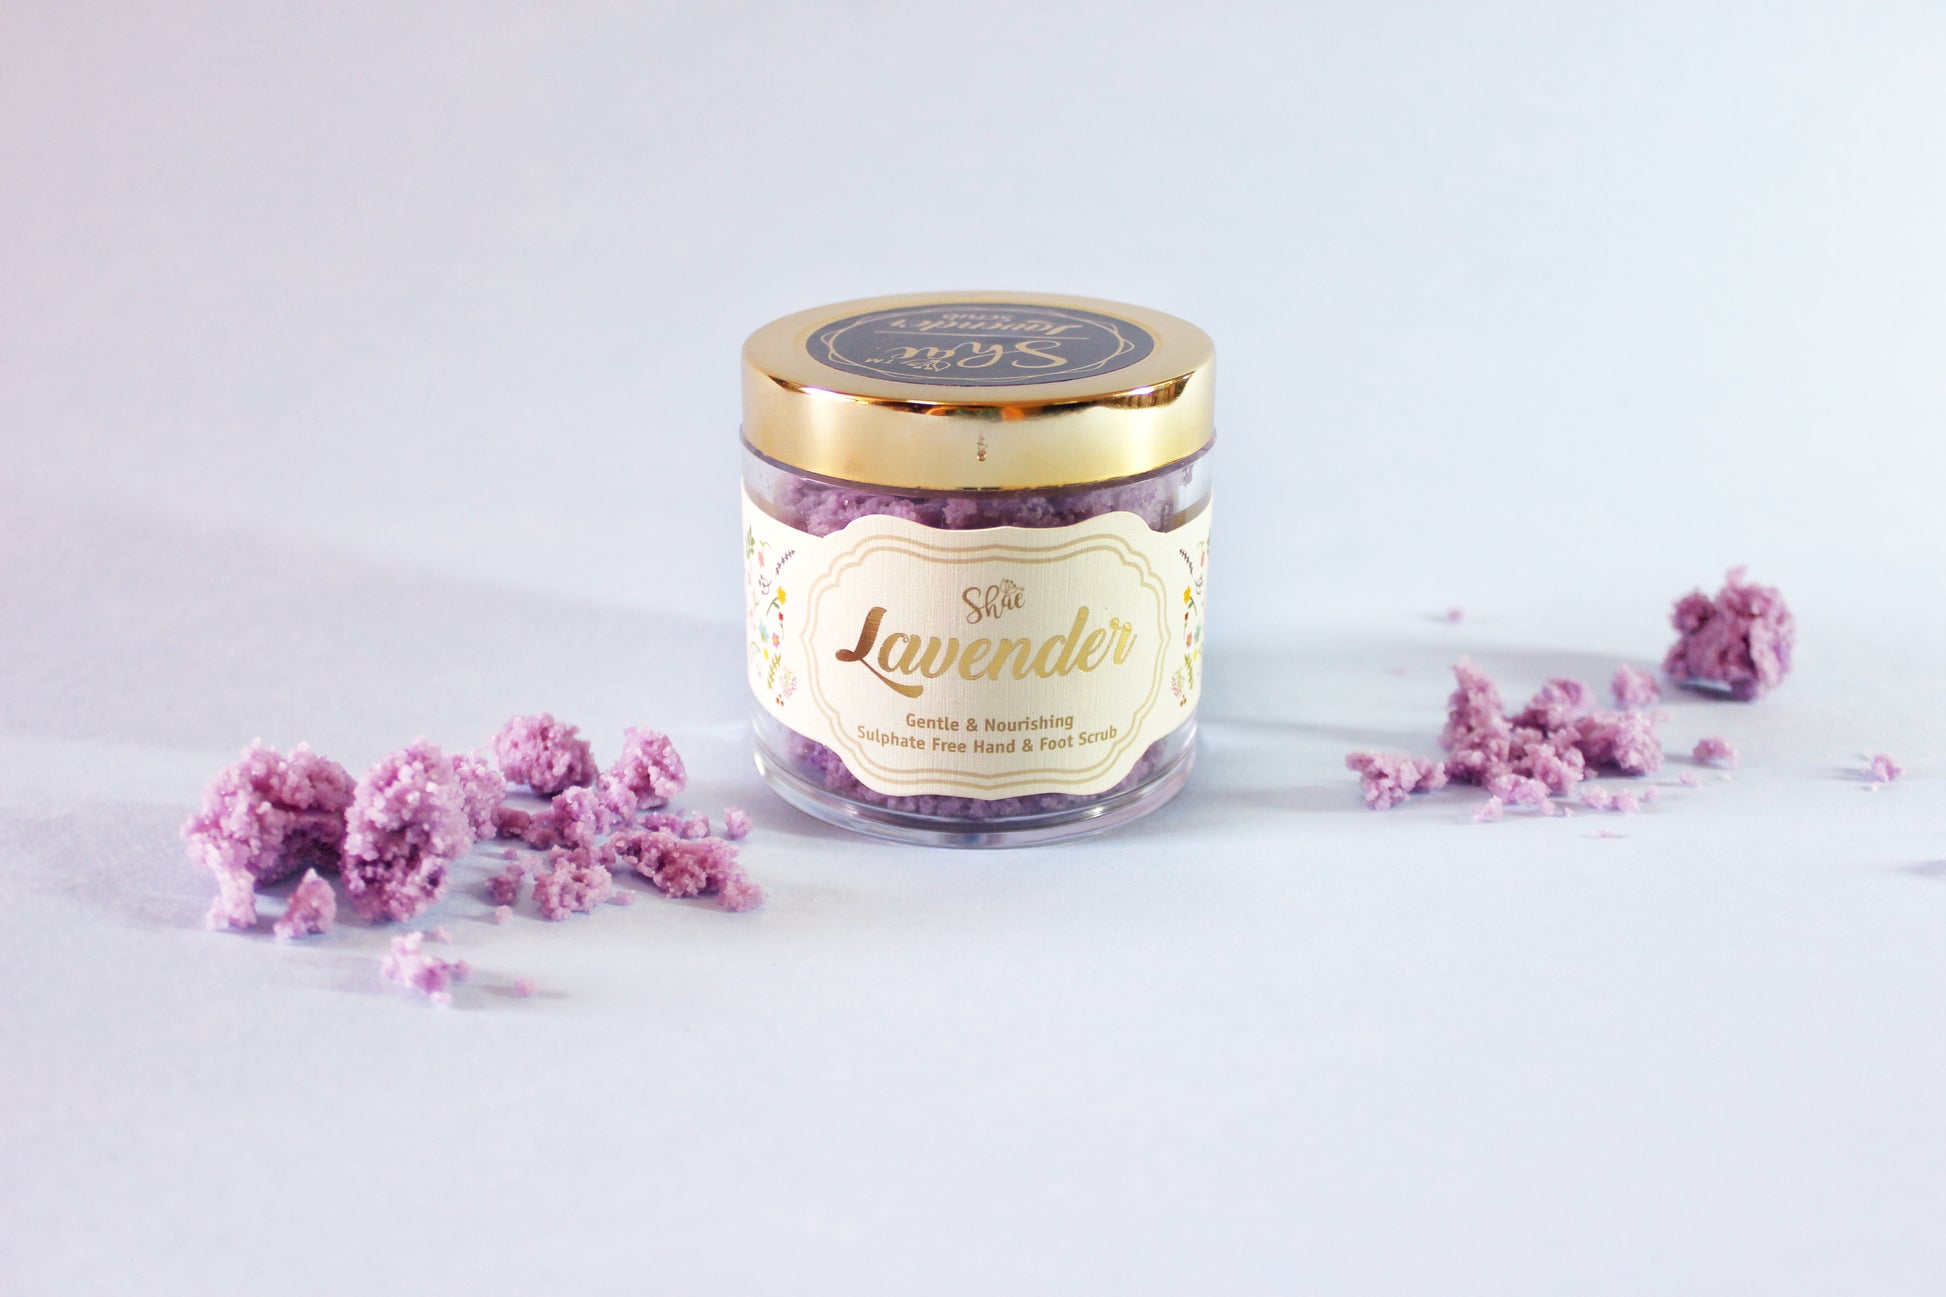 Shae Tips and Toes Combo - Lavender Hand and Foot Scrub & Honeycomb Healing Salve - Shae